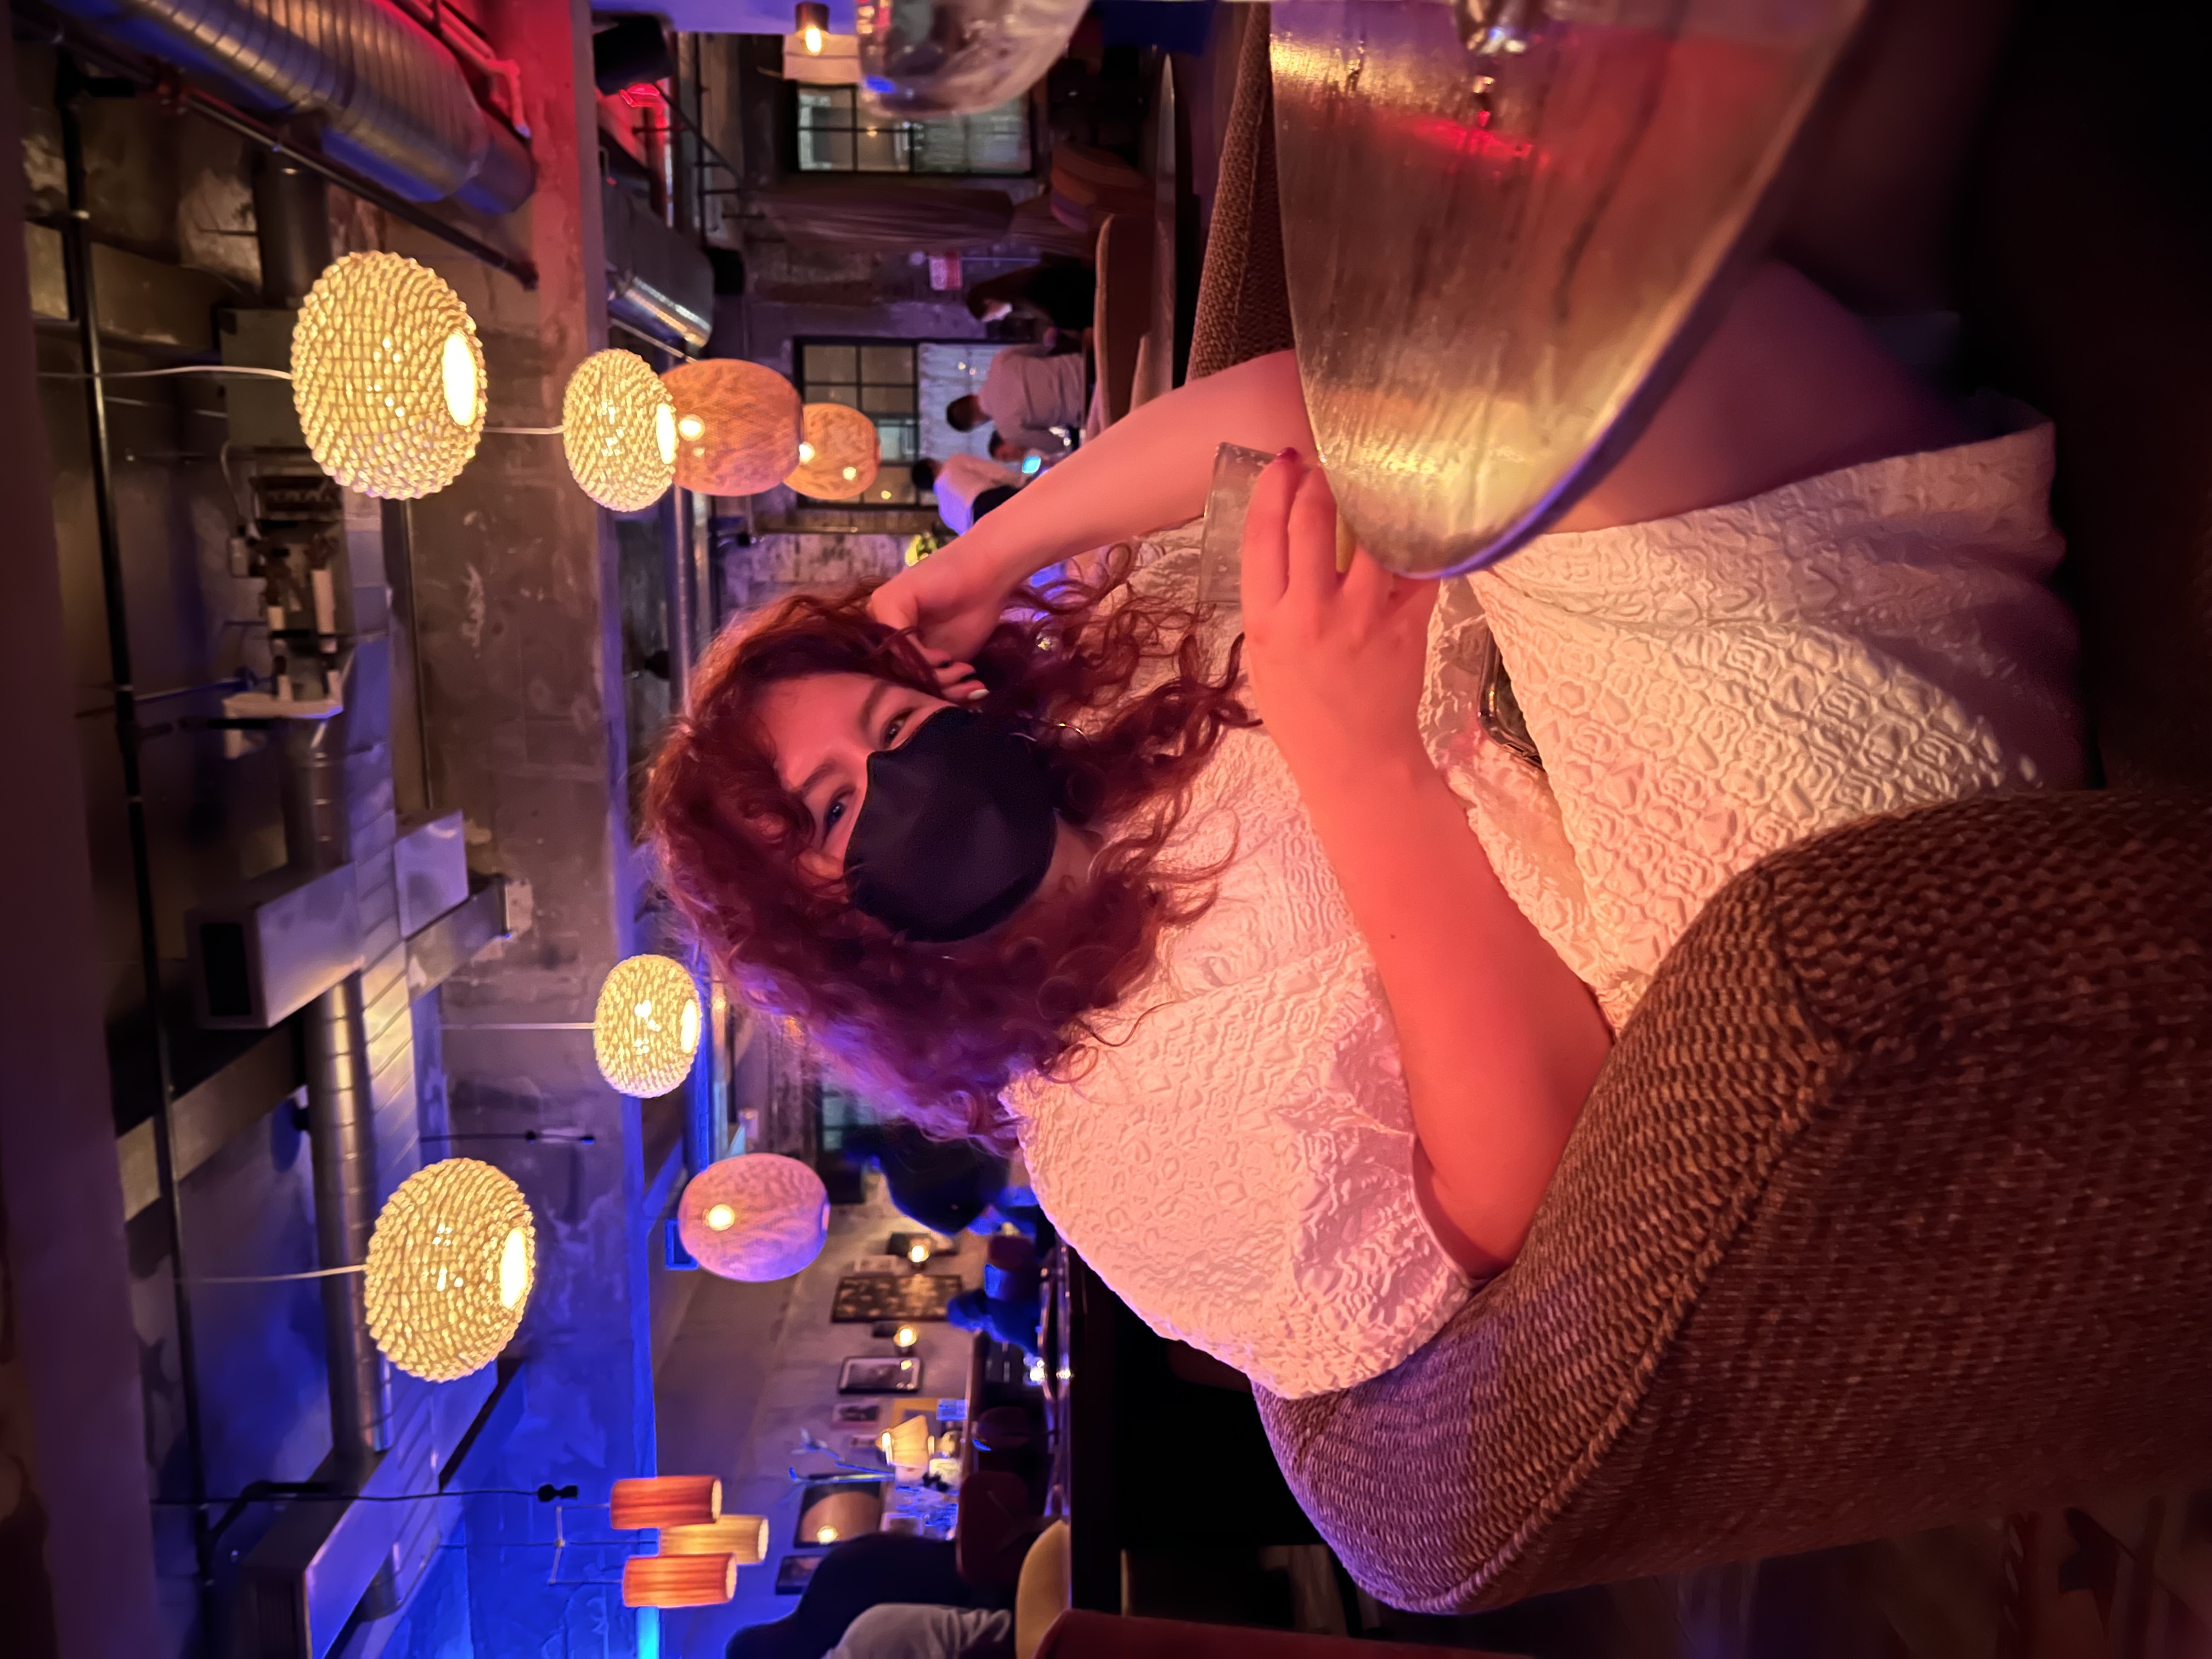 Author Dani Pierson wearing a mask sitting at a restaurant